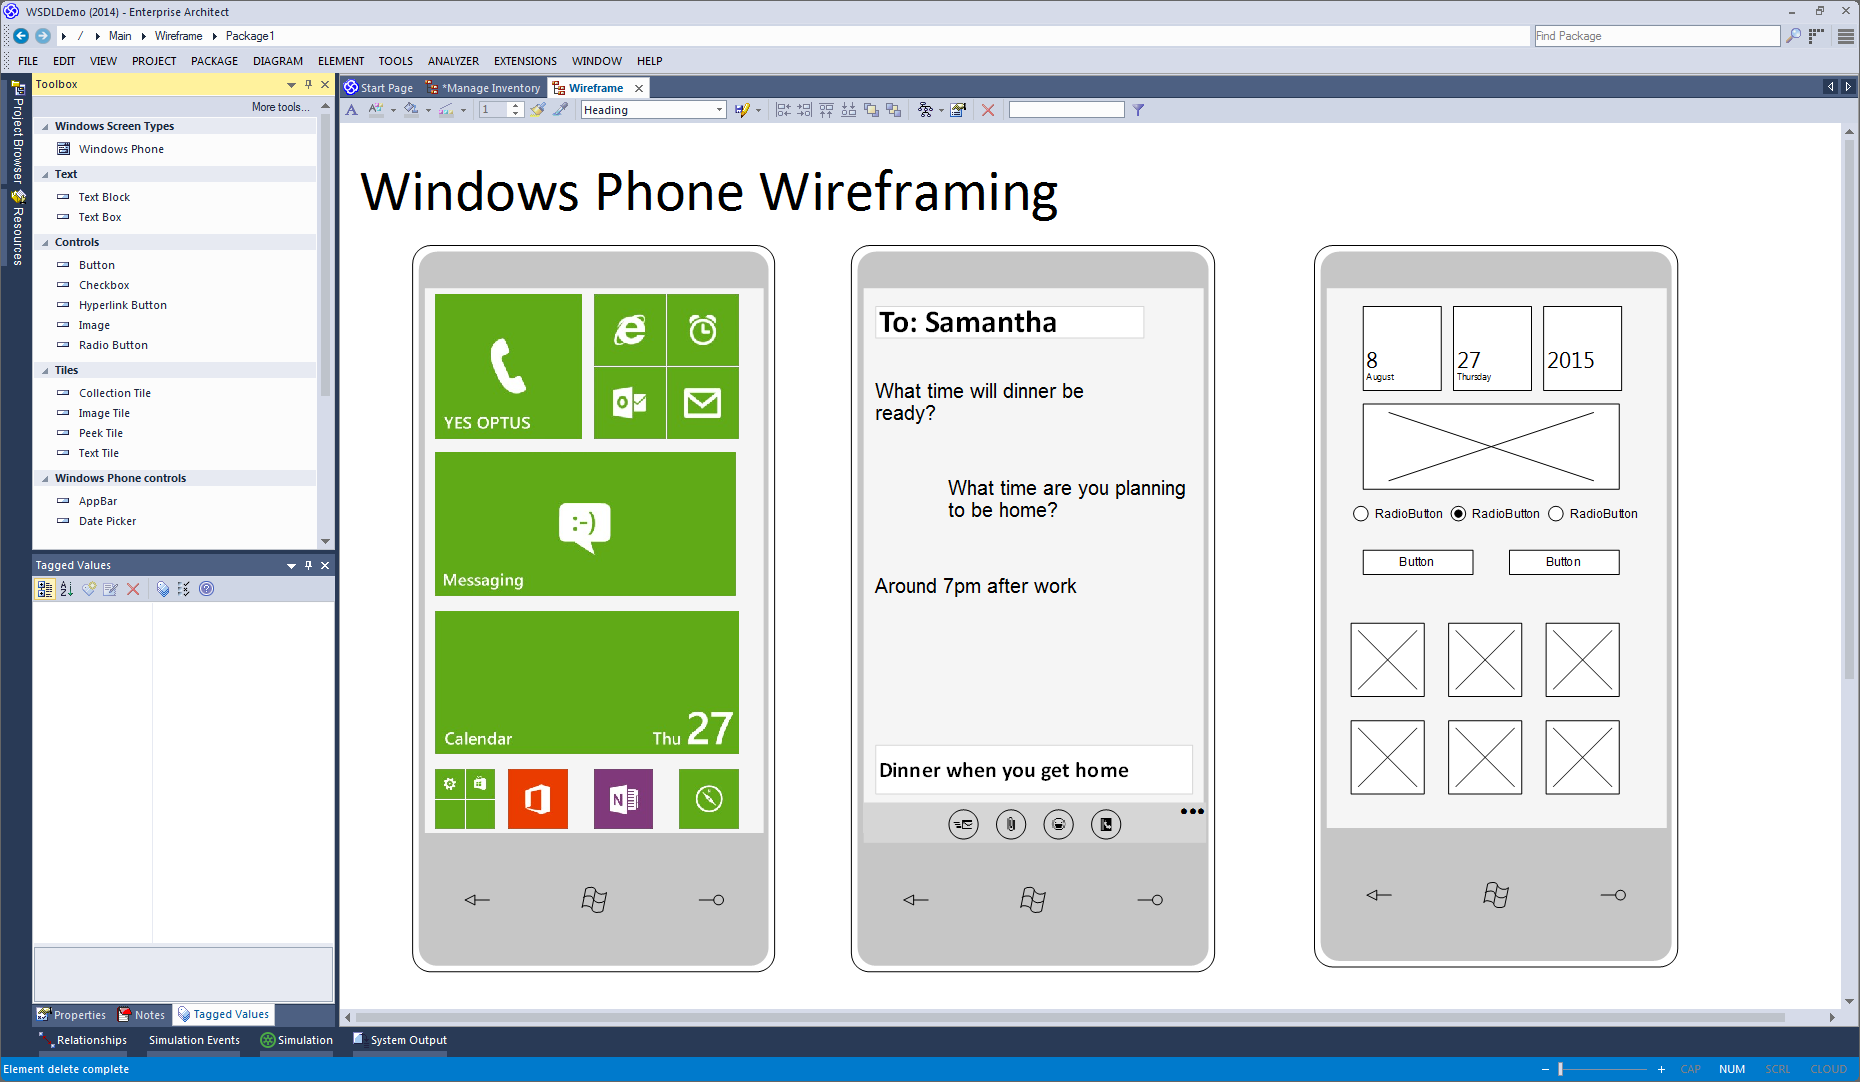 Enterprise Architect Professional Edition: Wireframing for Windows Phone